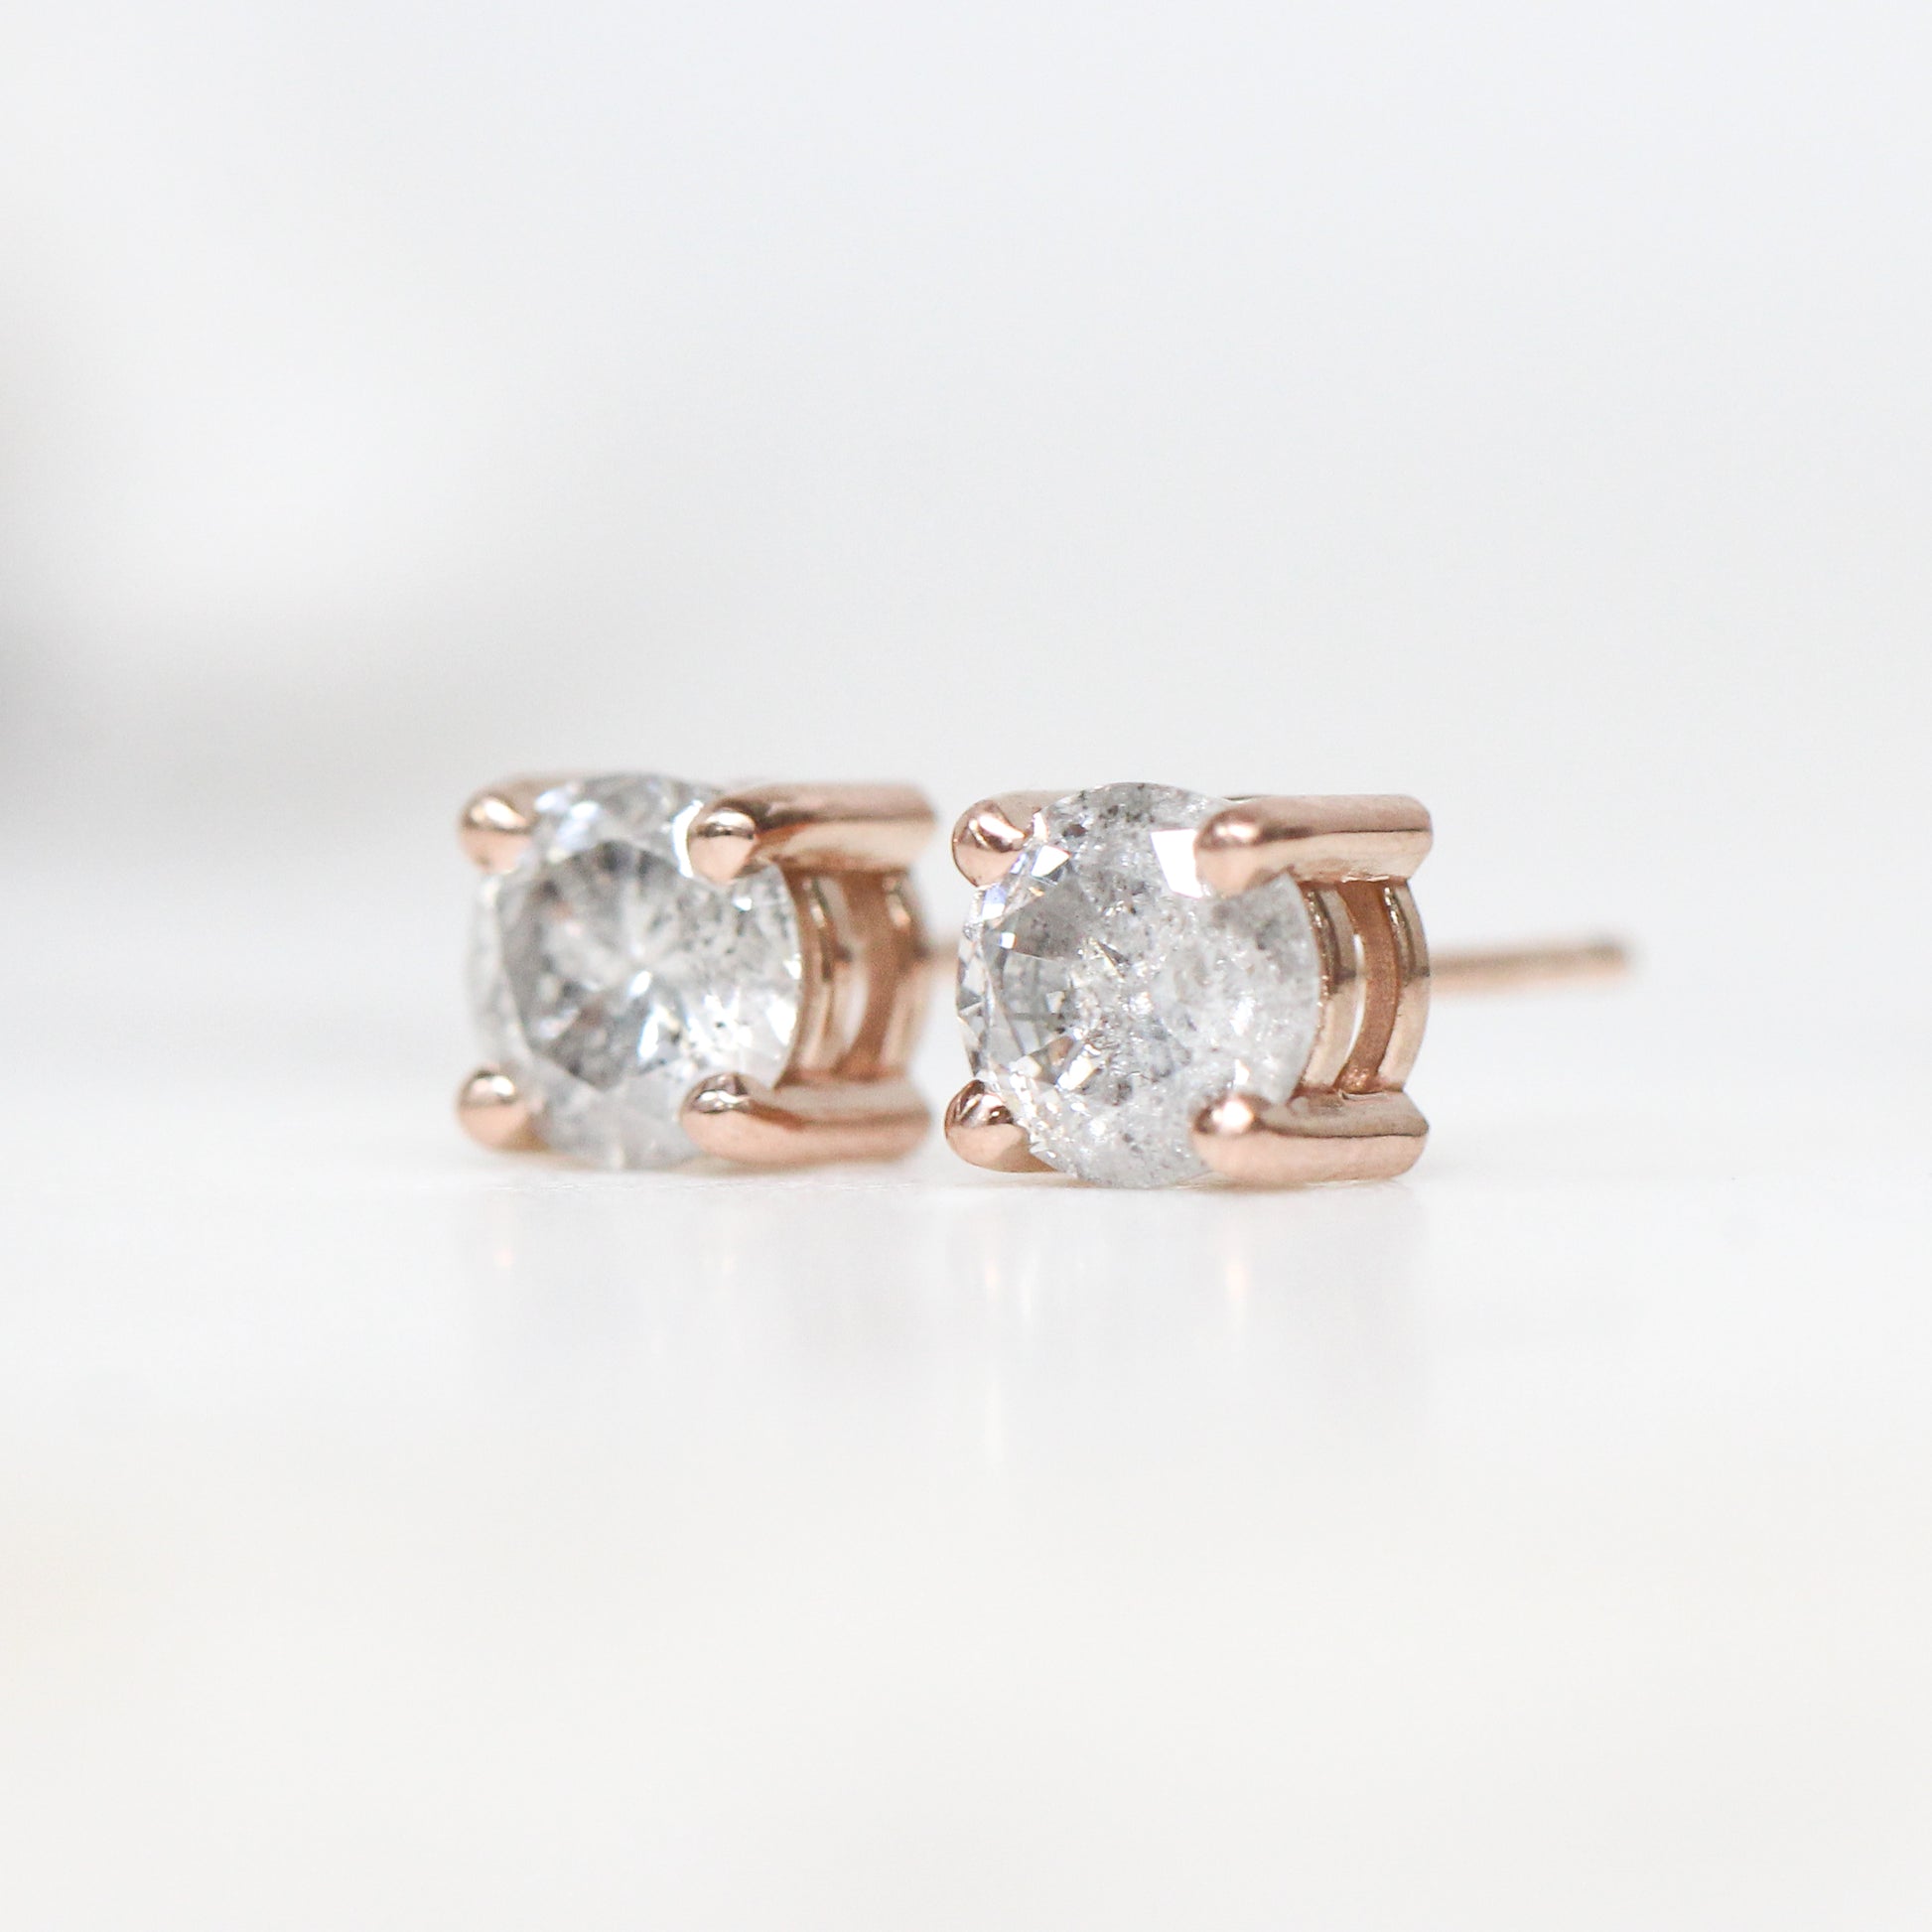 1.18 Carat Brilliant Cut Light Gray Round Celestial Diamond Earring Studs in 14k Rose Gold - Midwinter Co. Alternative Bridal Rings and Modern Fine Jewelry